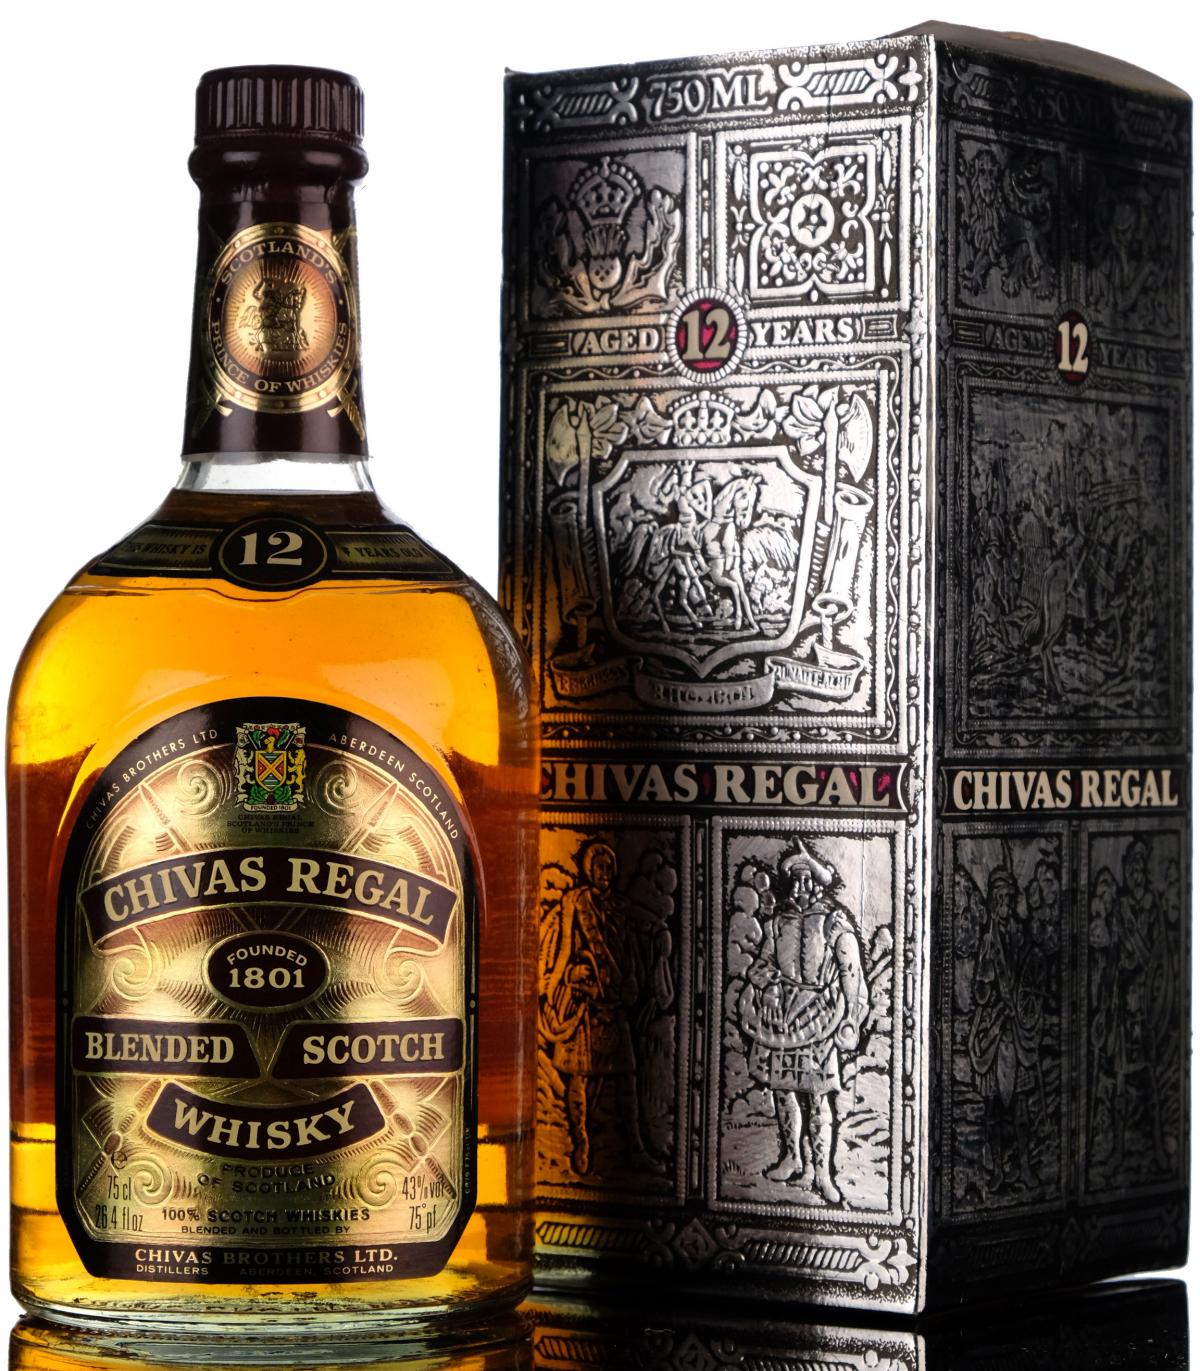 Chivas Regal 12 Year Old - Late 1970s